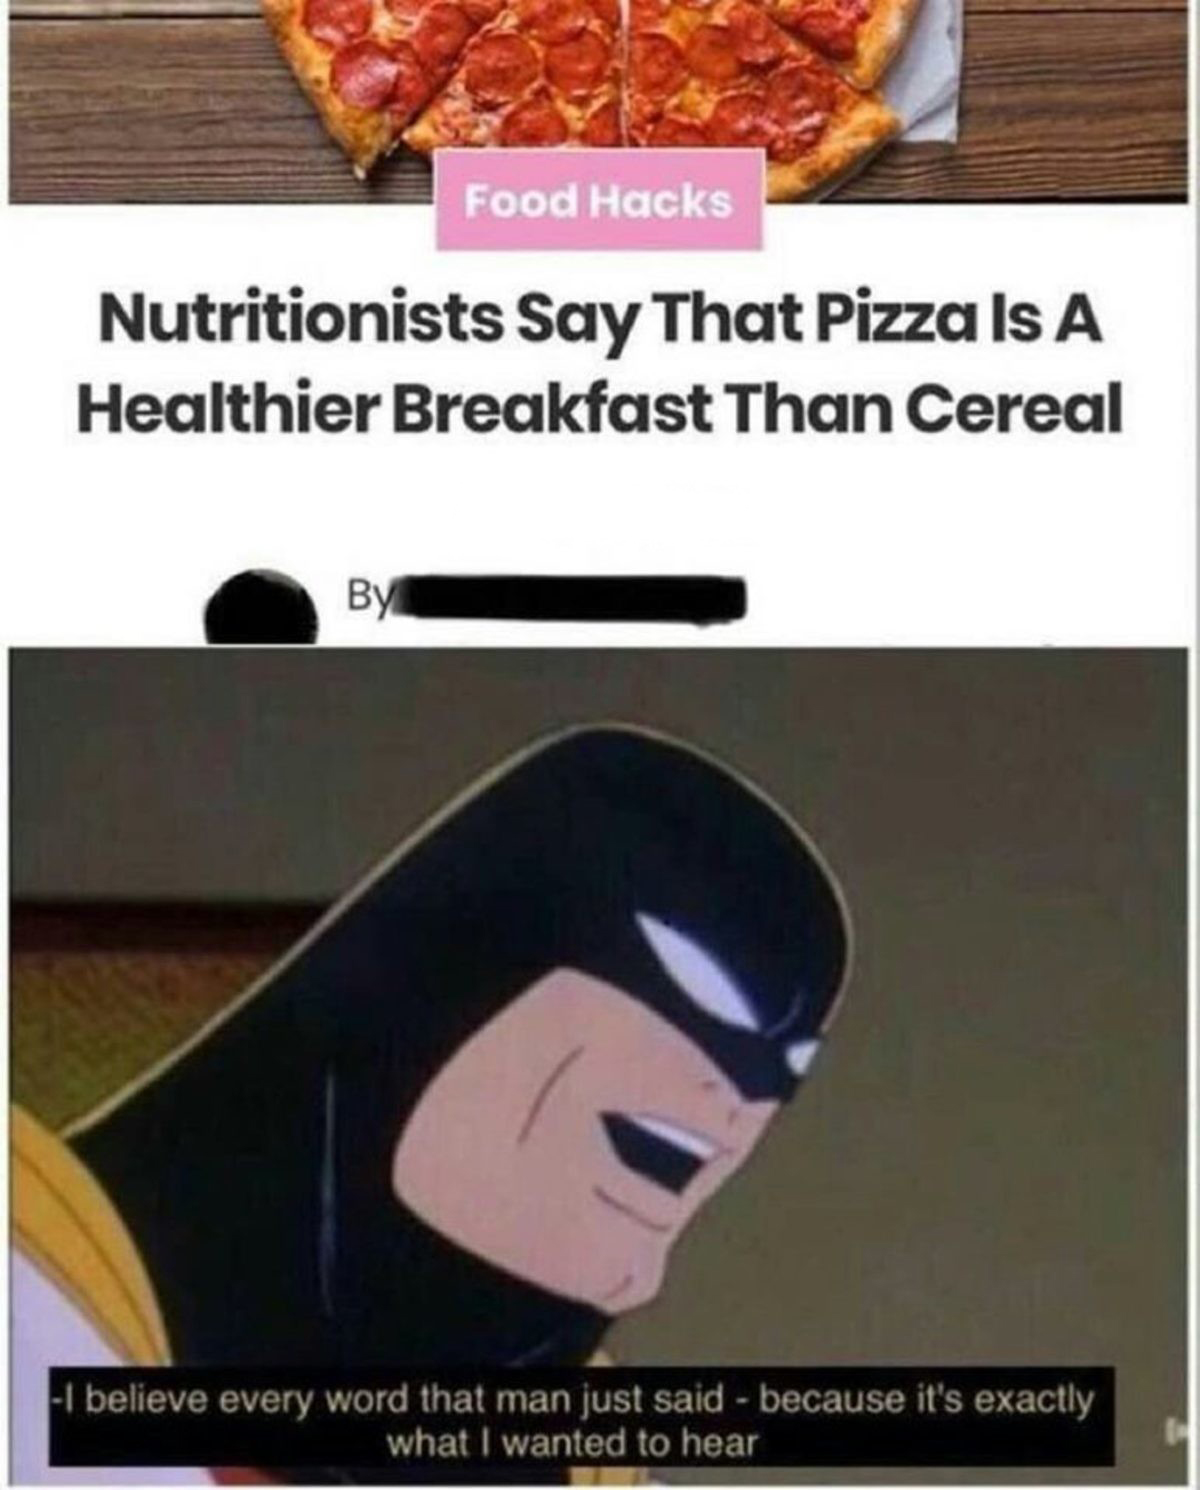 pizza is healthier than breakfast cereal meme - Food Hacks Nutritionists Say That Pizza Is A Healthier Breakfast Than Cereal I believe every word that man just said because it's exactly what I wanted to hear